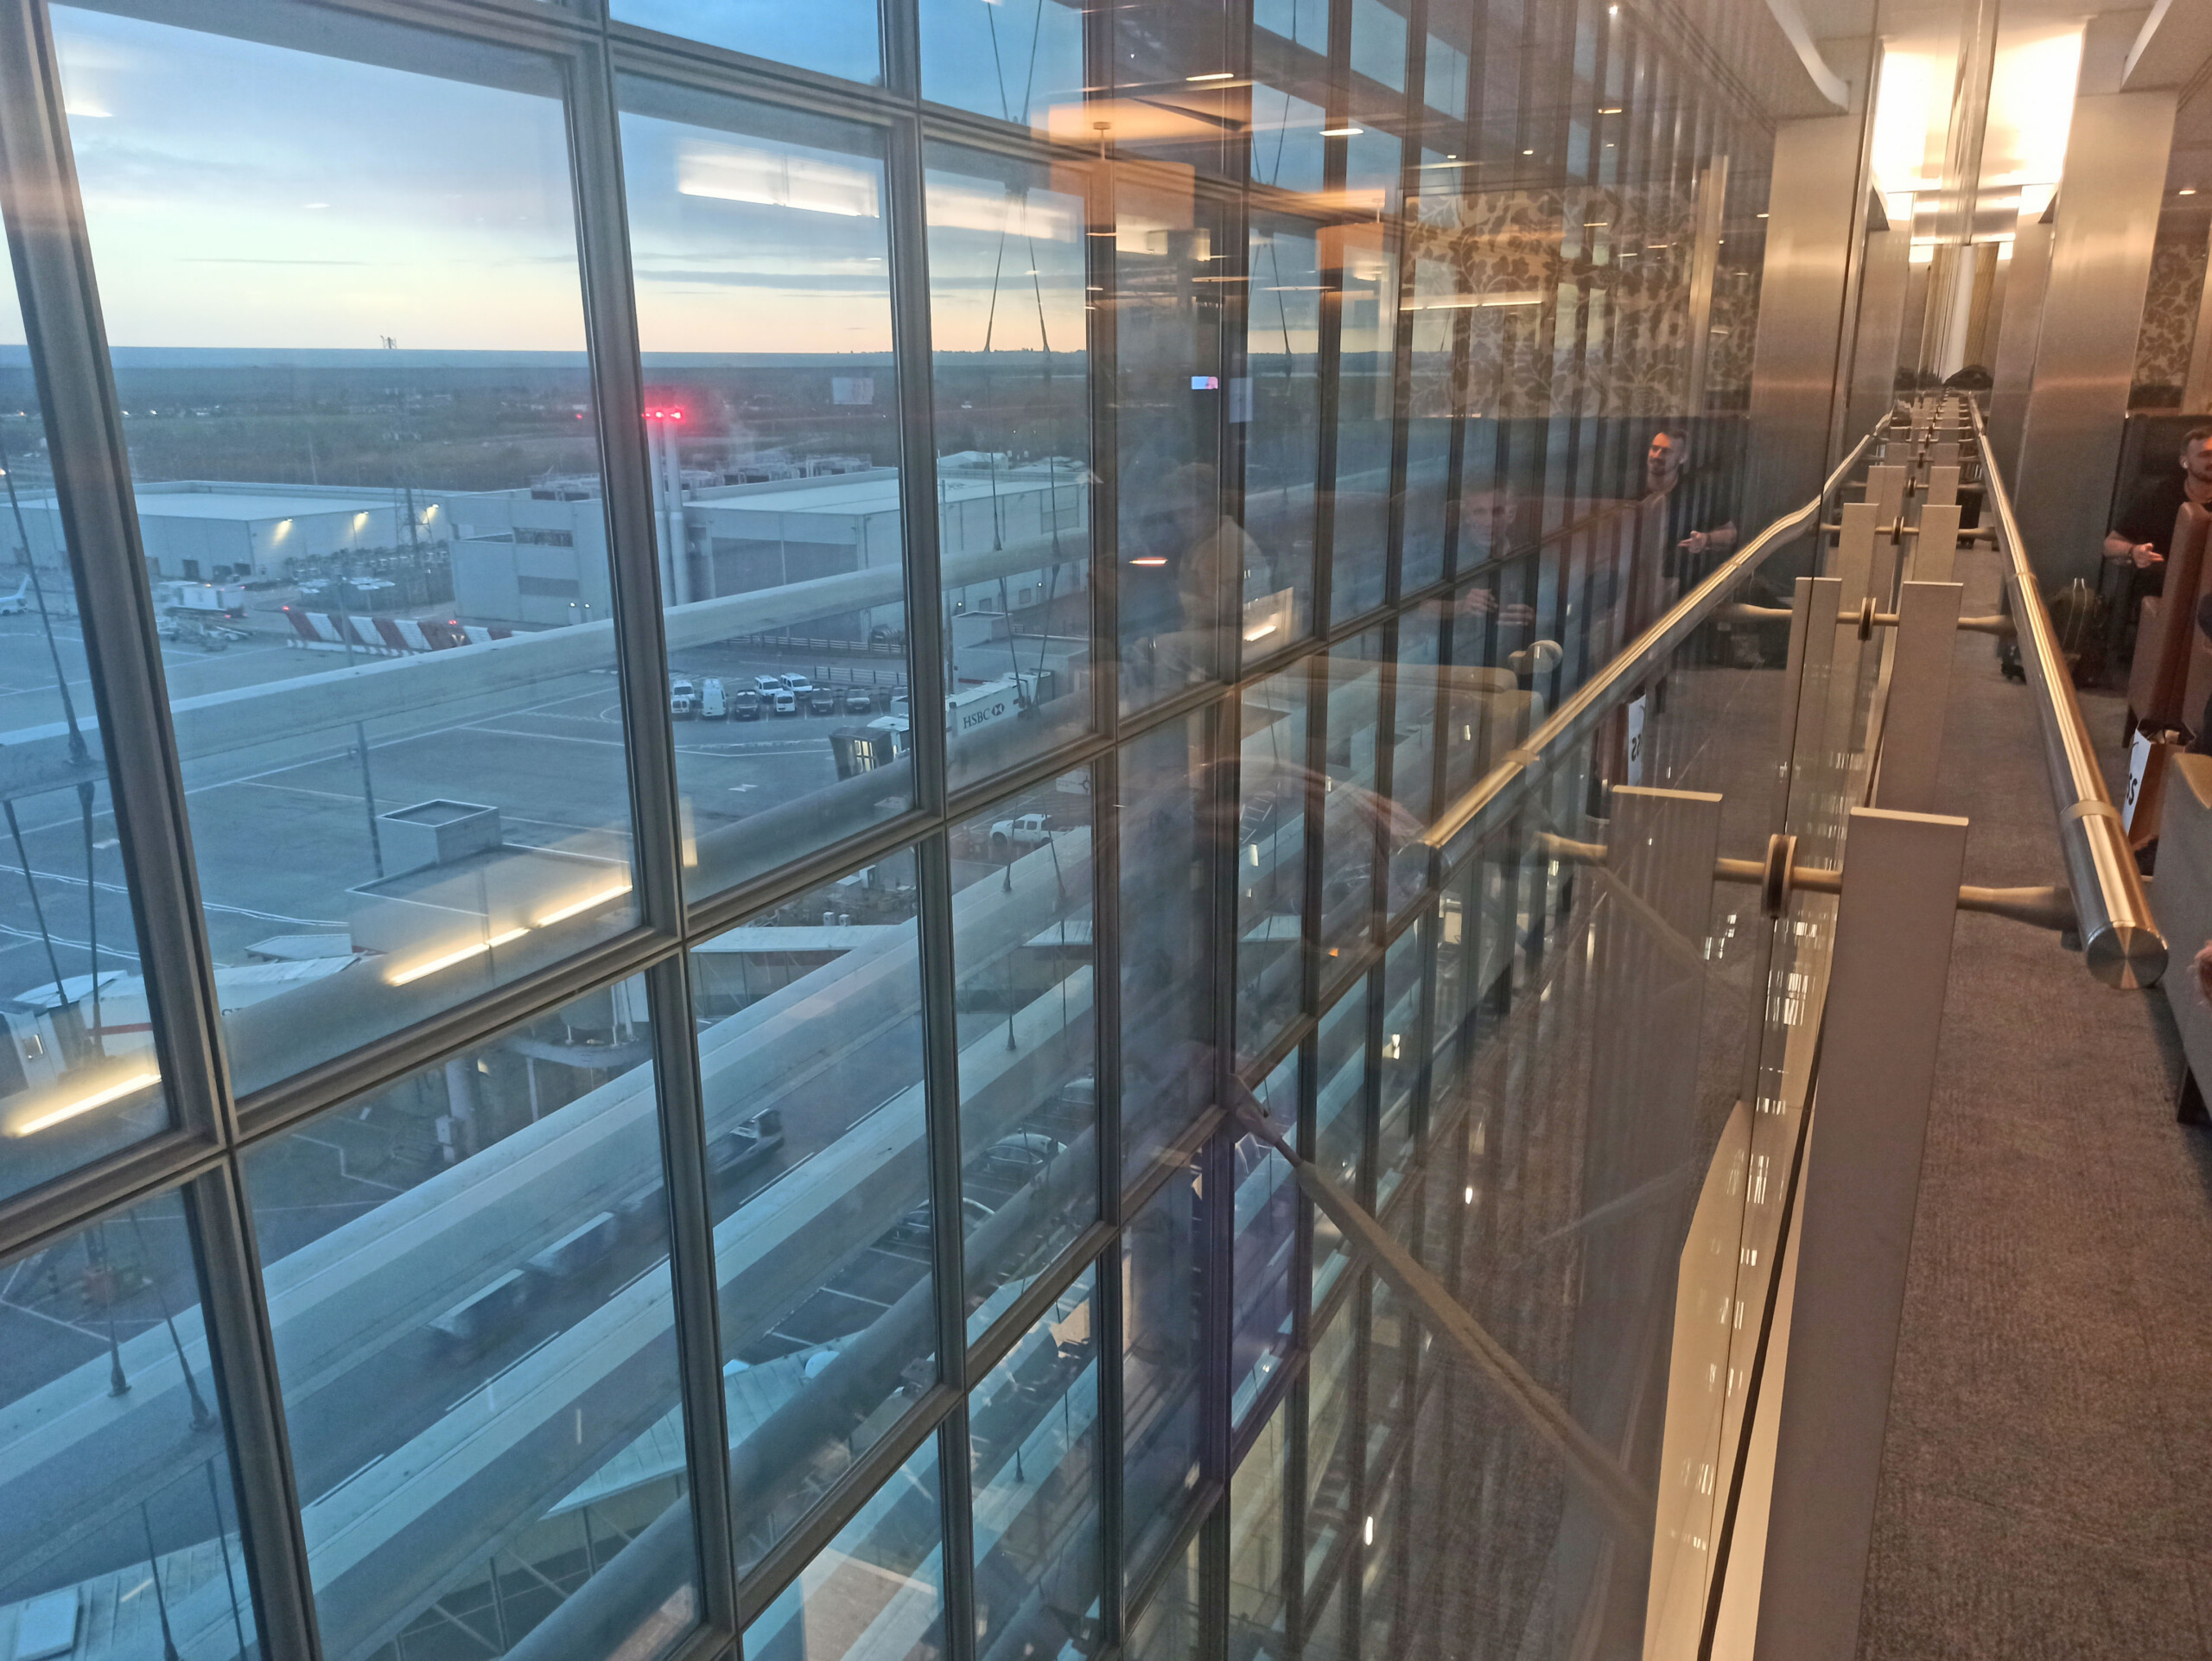 Apron View at the British Airways Club Lounge South